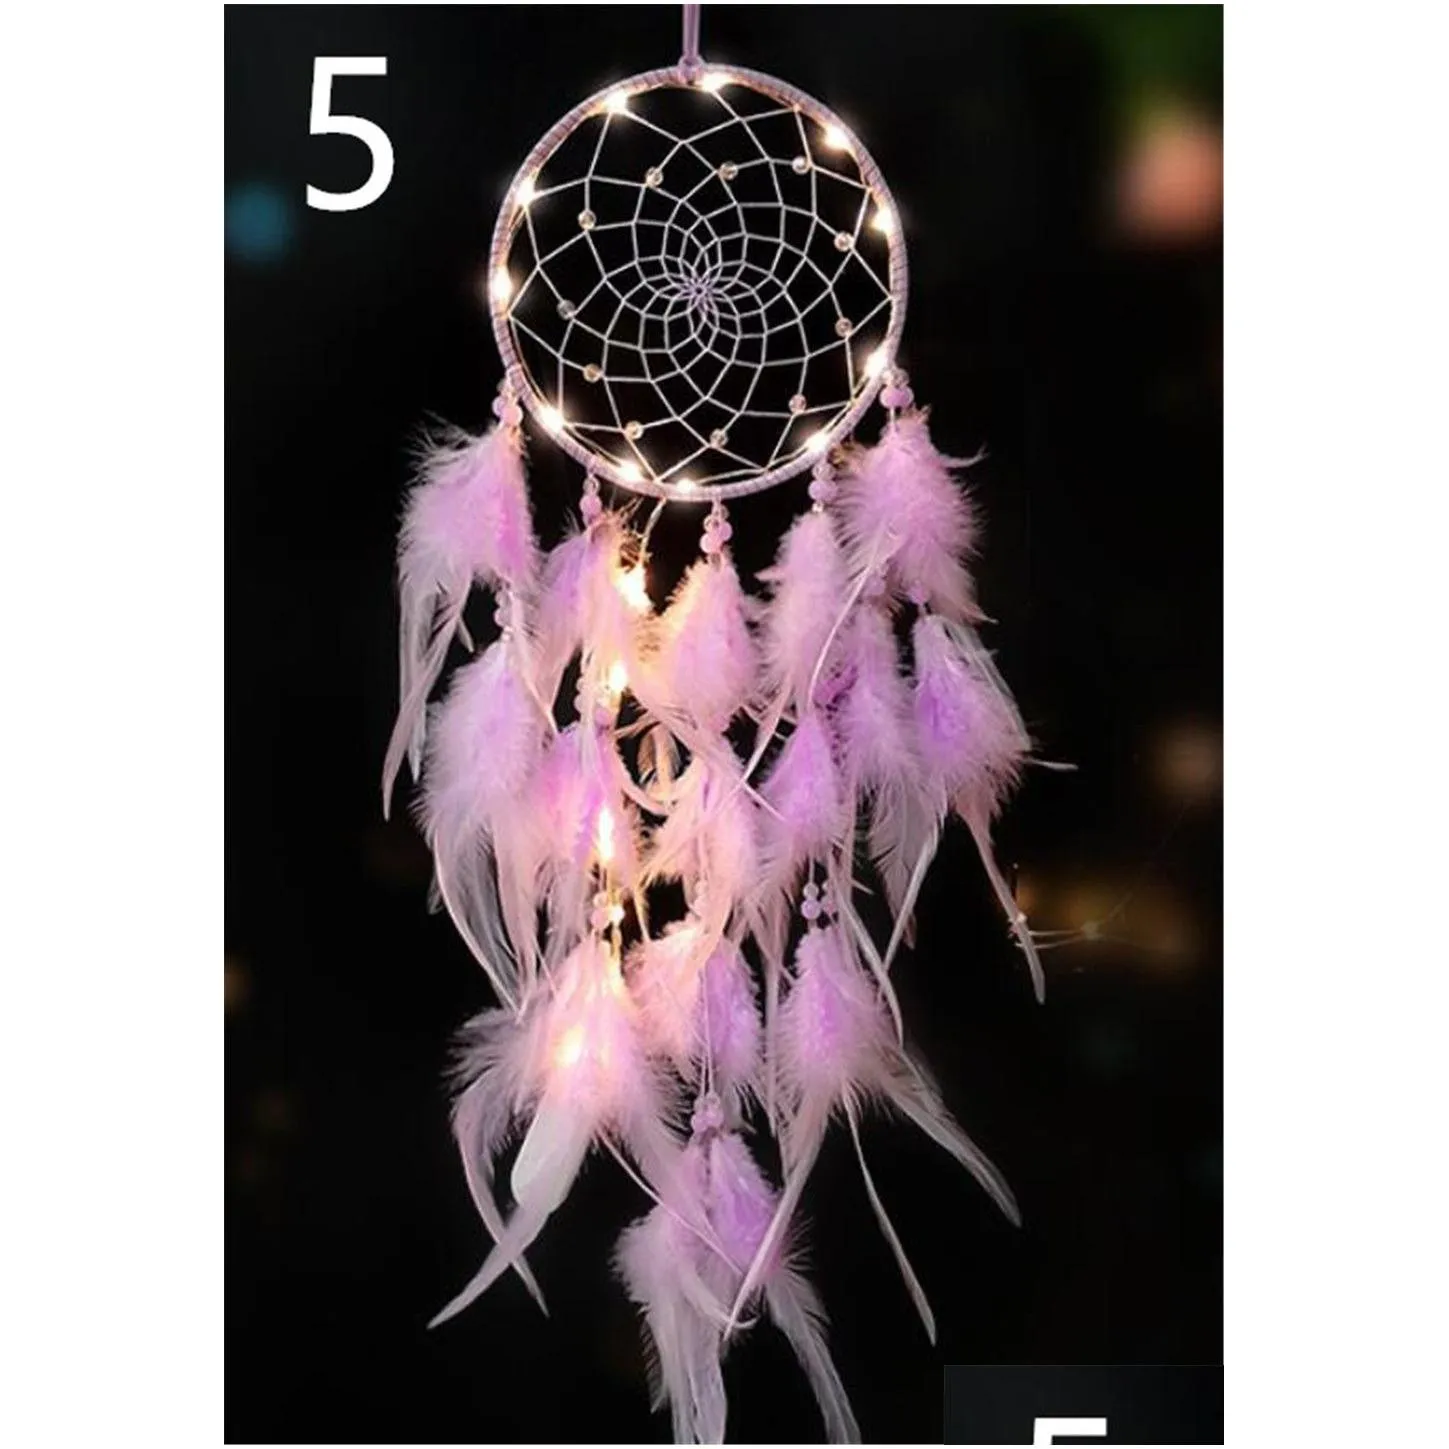 girl heart dream catcher national feather ornaments lace ribbons feathers wrapped lights girls room decor dreamcatcher xb